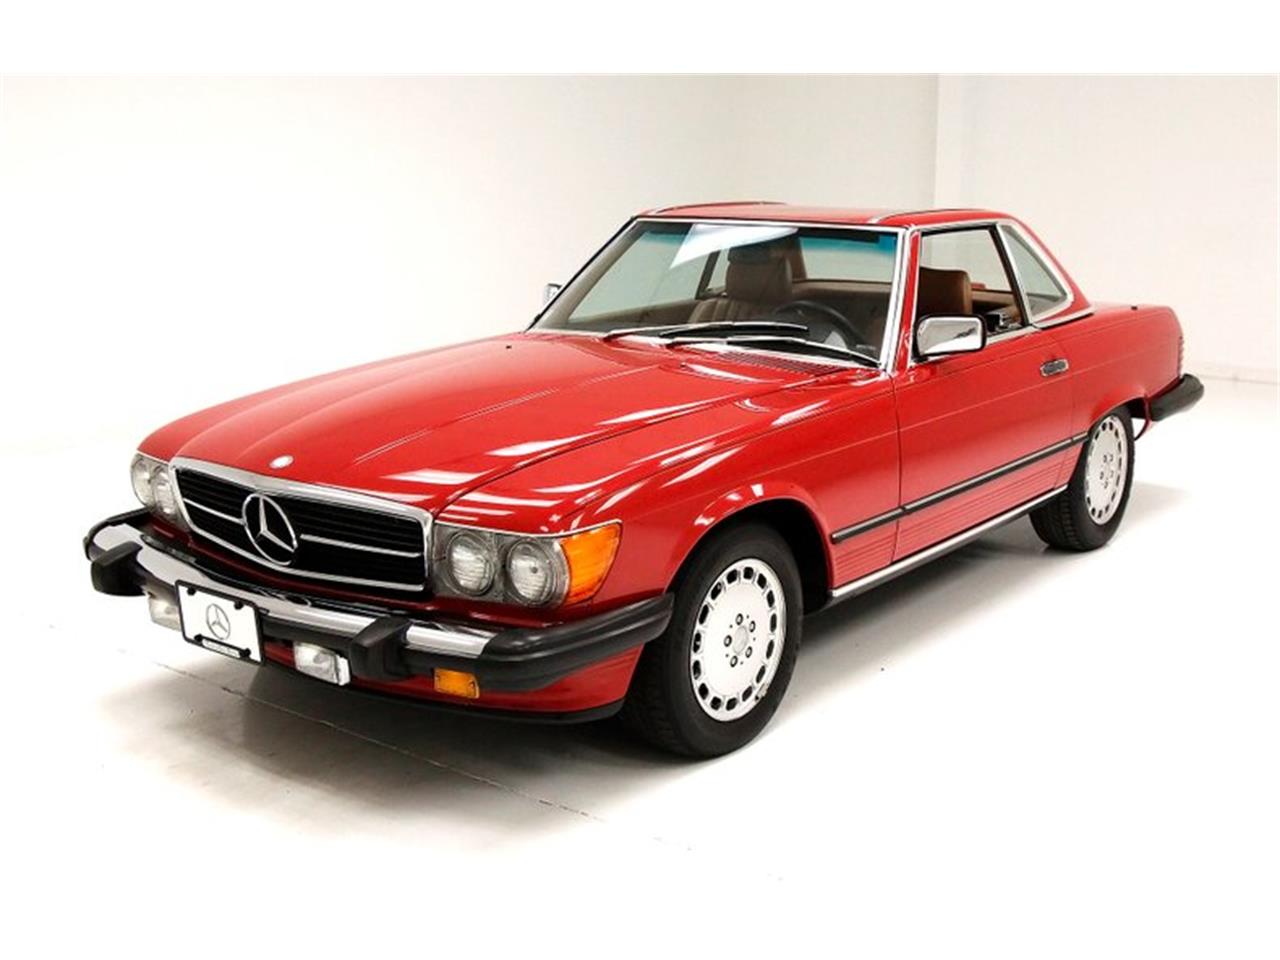 1986 Mercedes-Benz 560SL for sale in Morgantown, PA